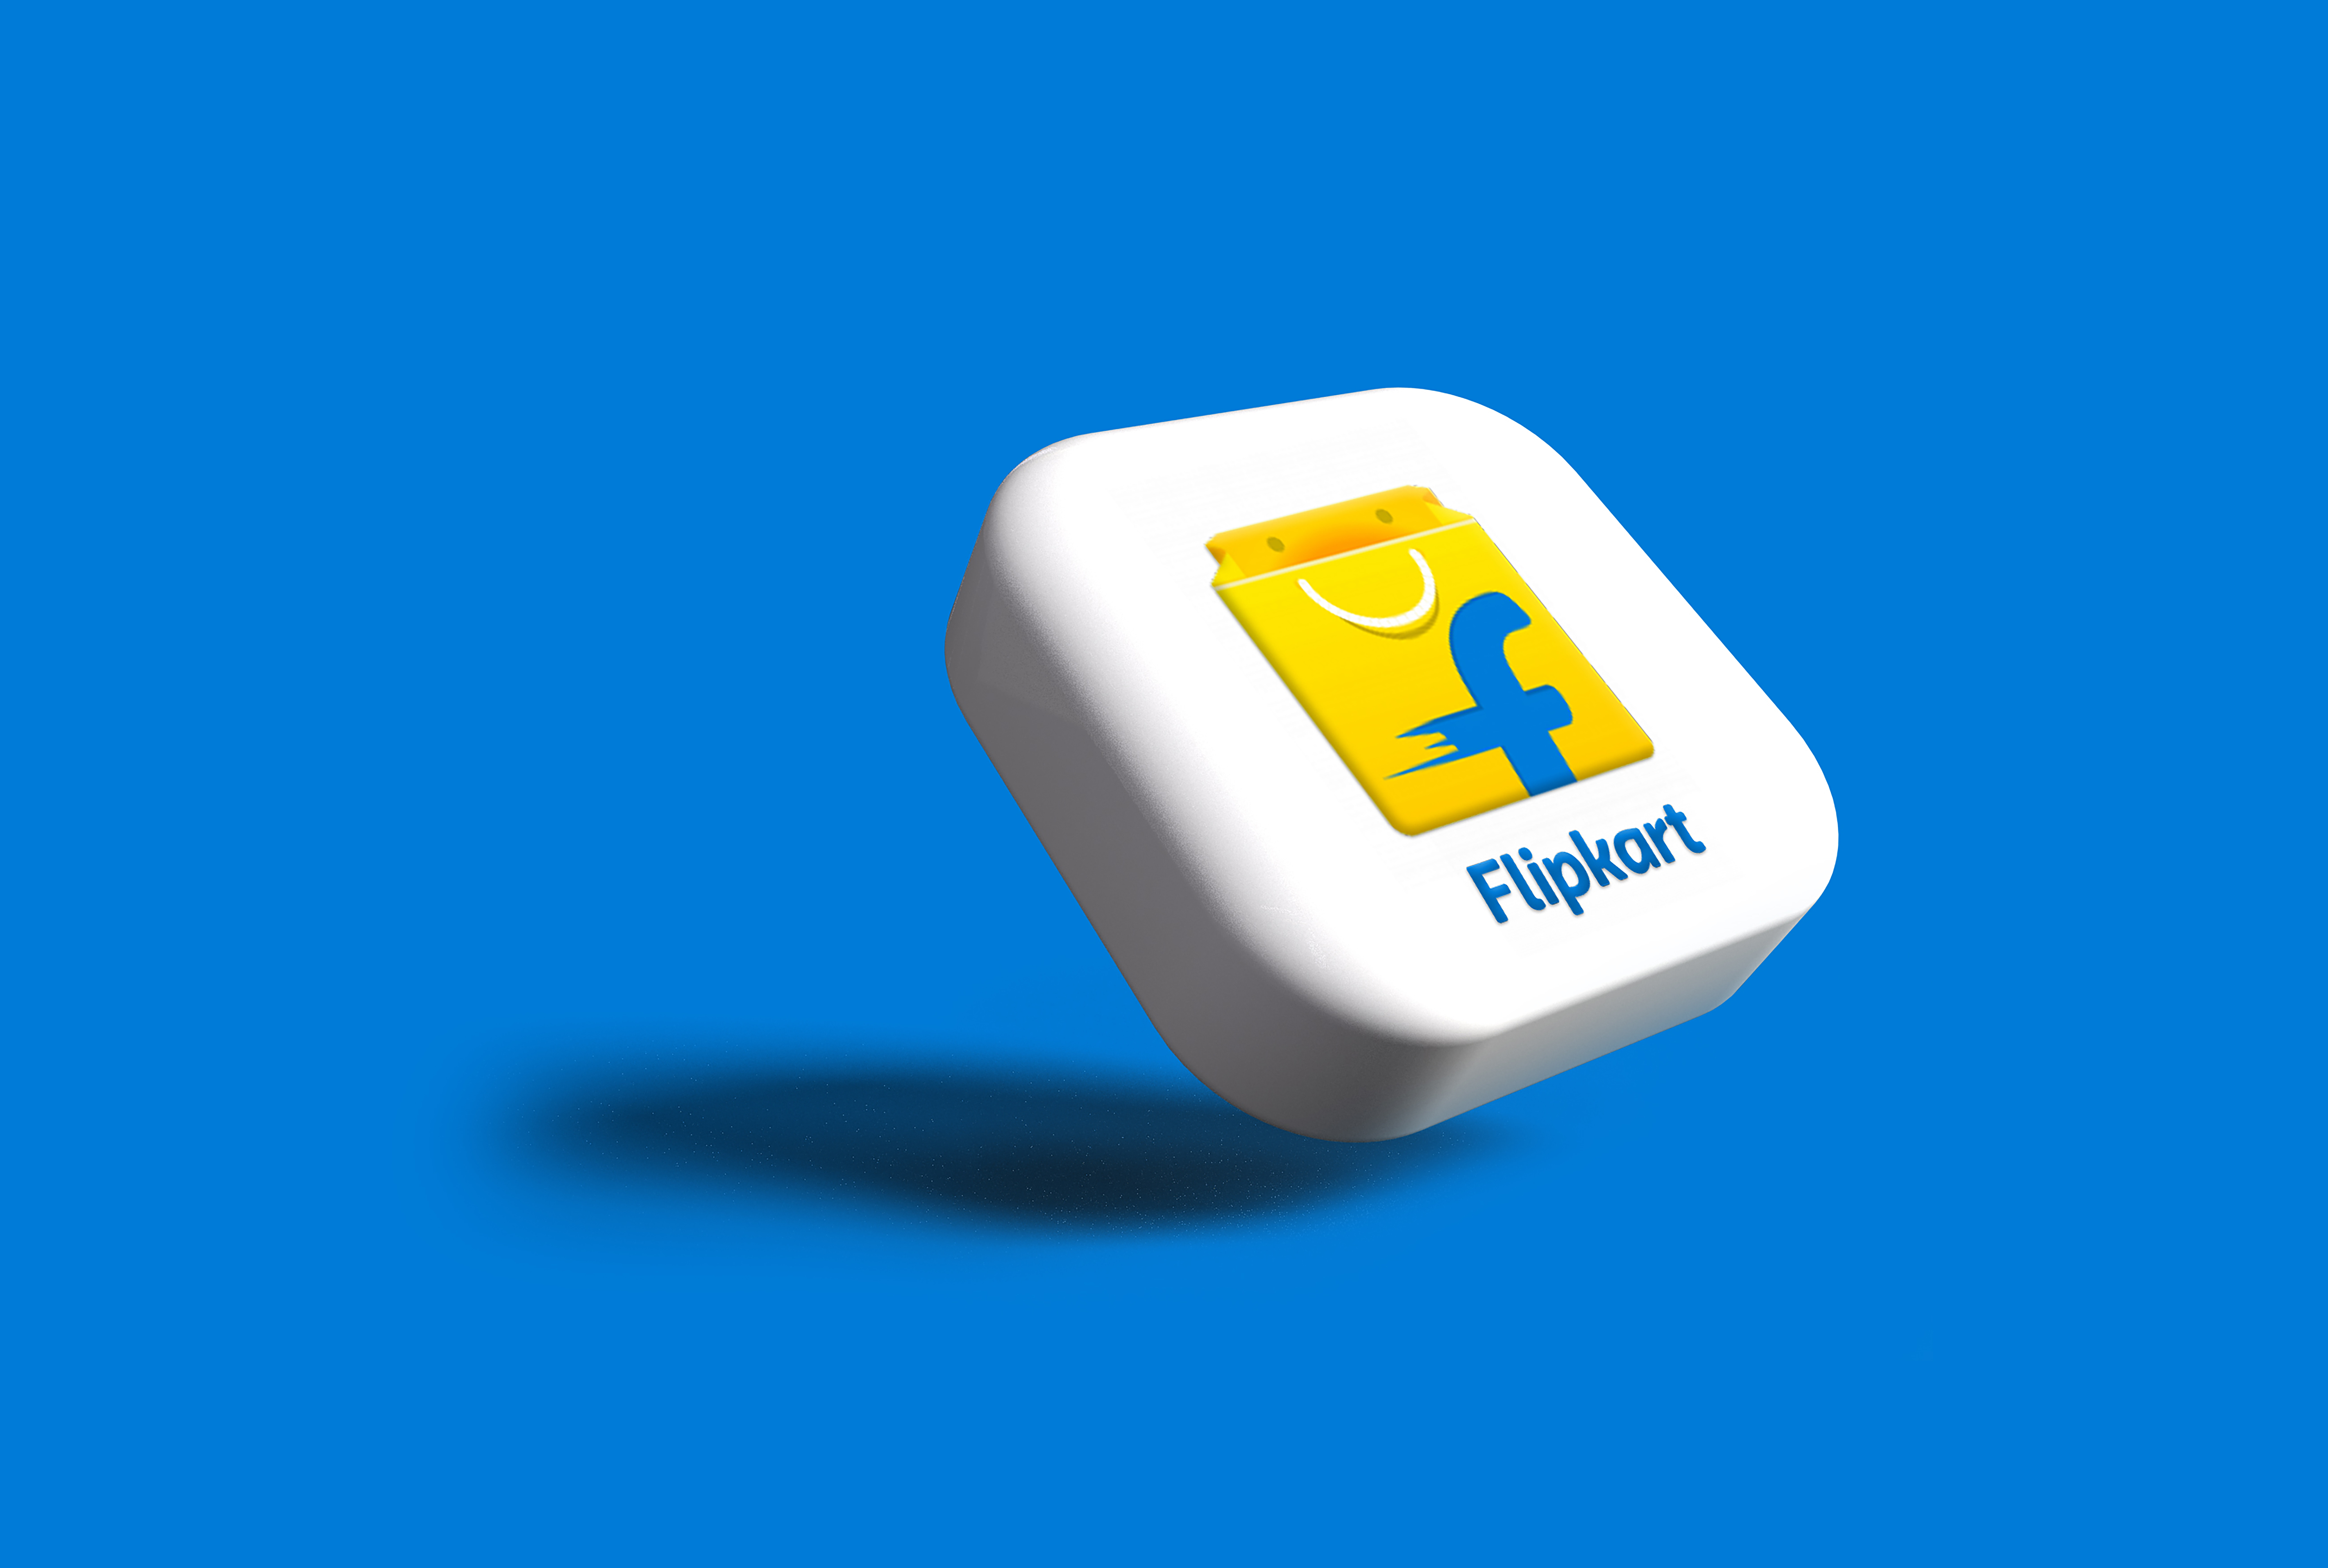 Polygon ecosystem onboards Flipkart to build L2 chain